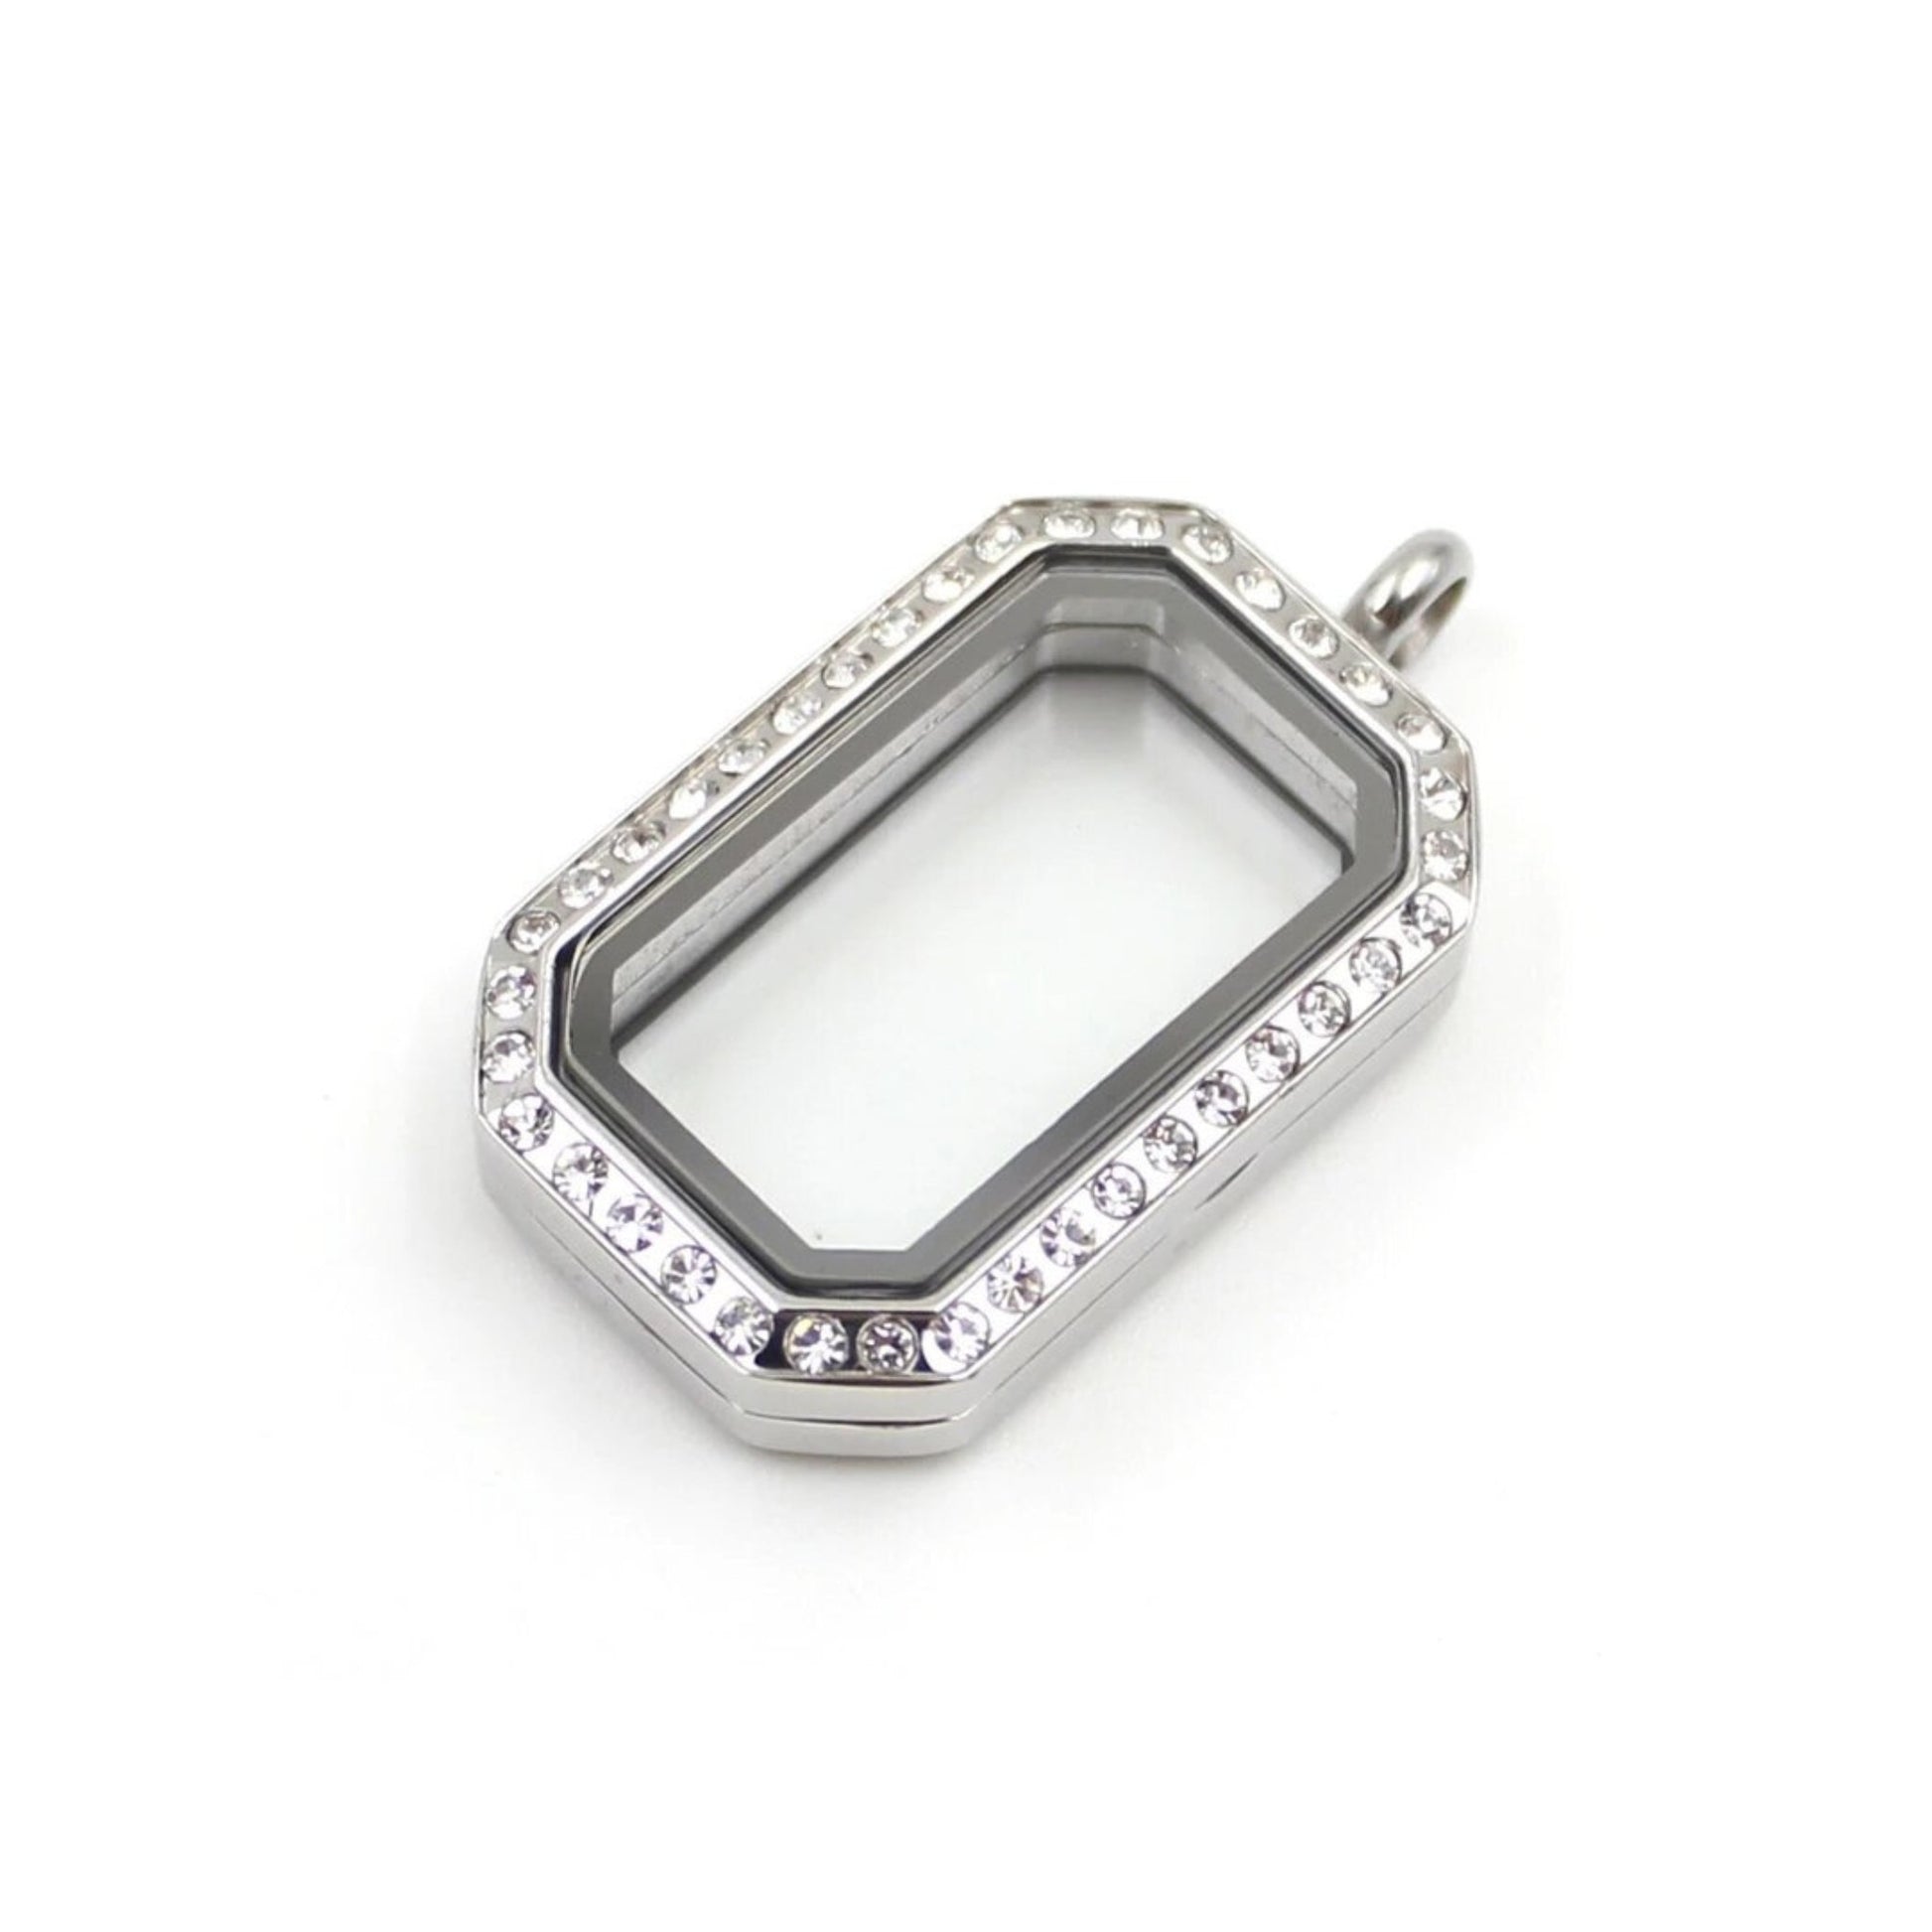 NEW! Limited Edition Memory Locket - Portrait Frame with Crystals - The Little Jewellery Company